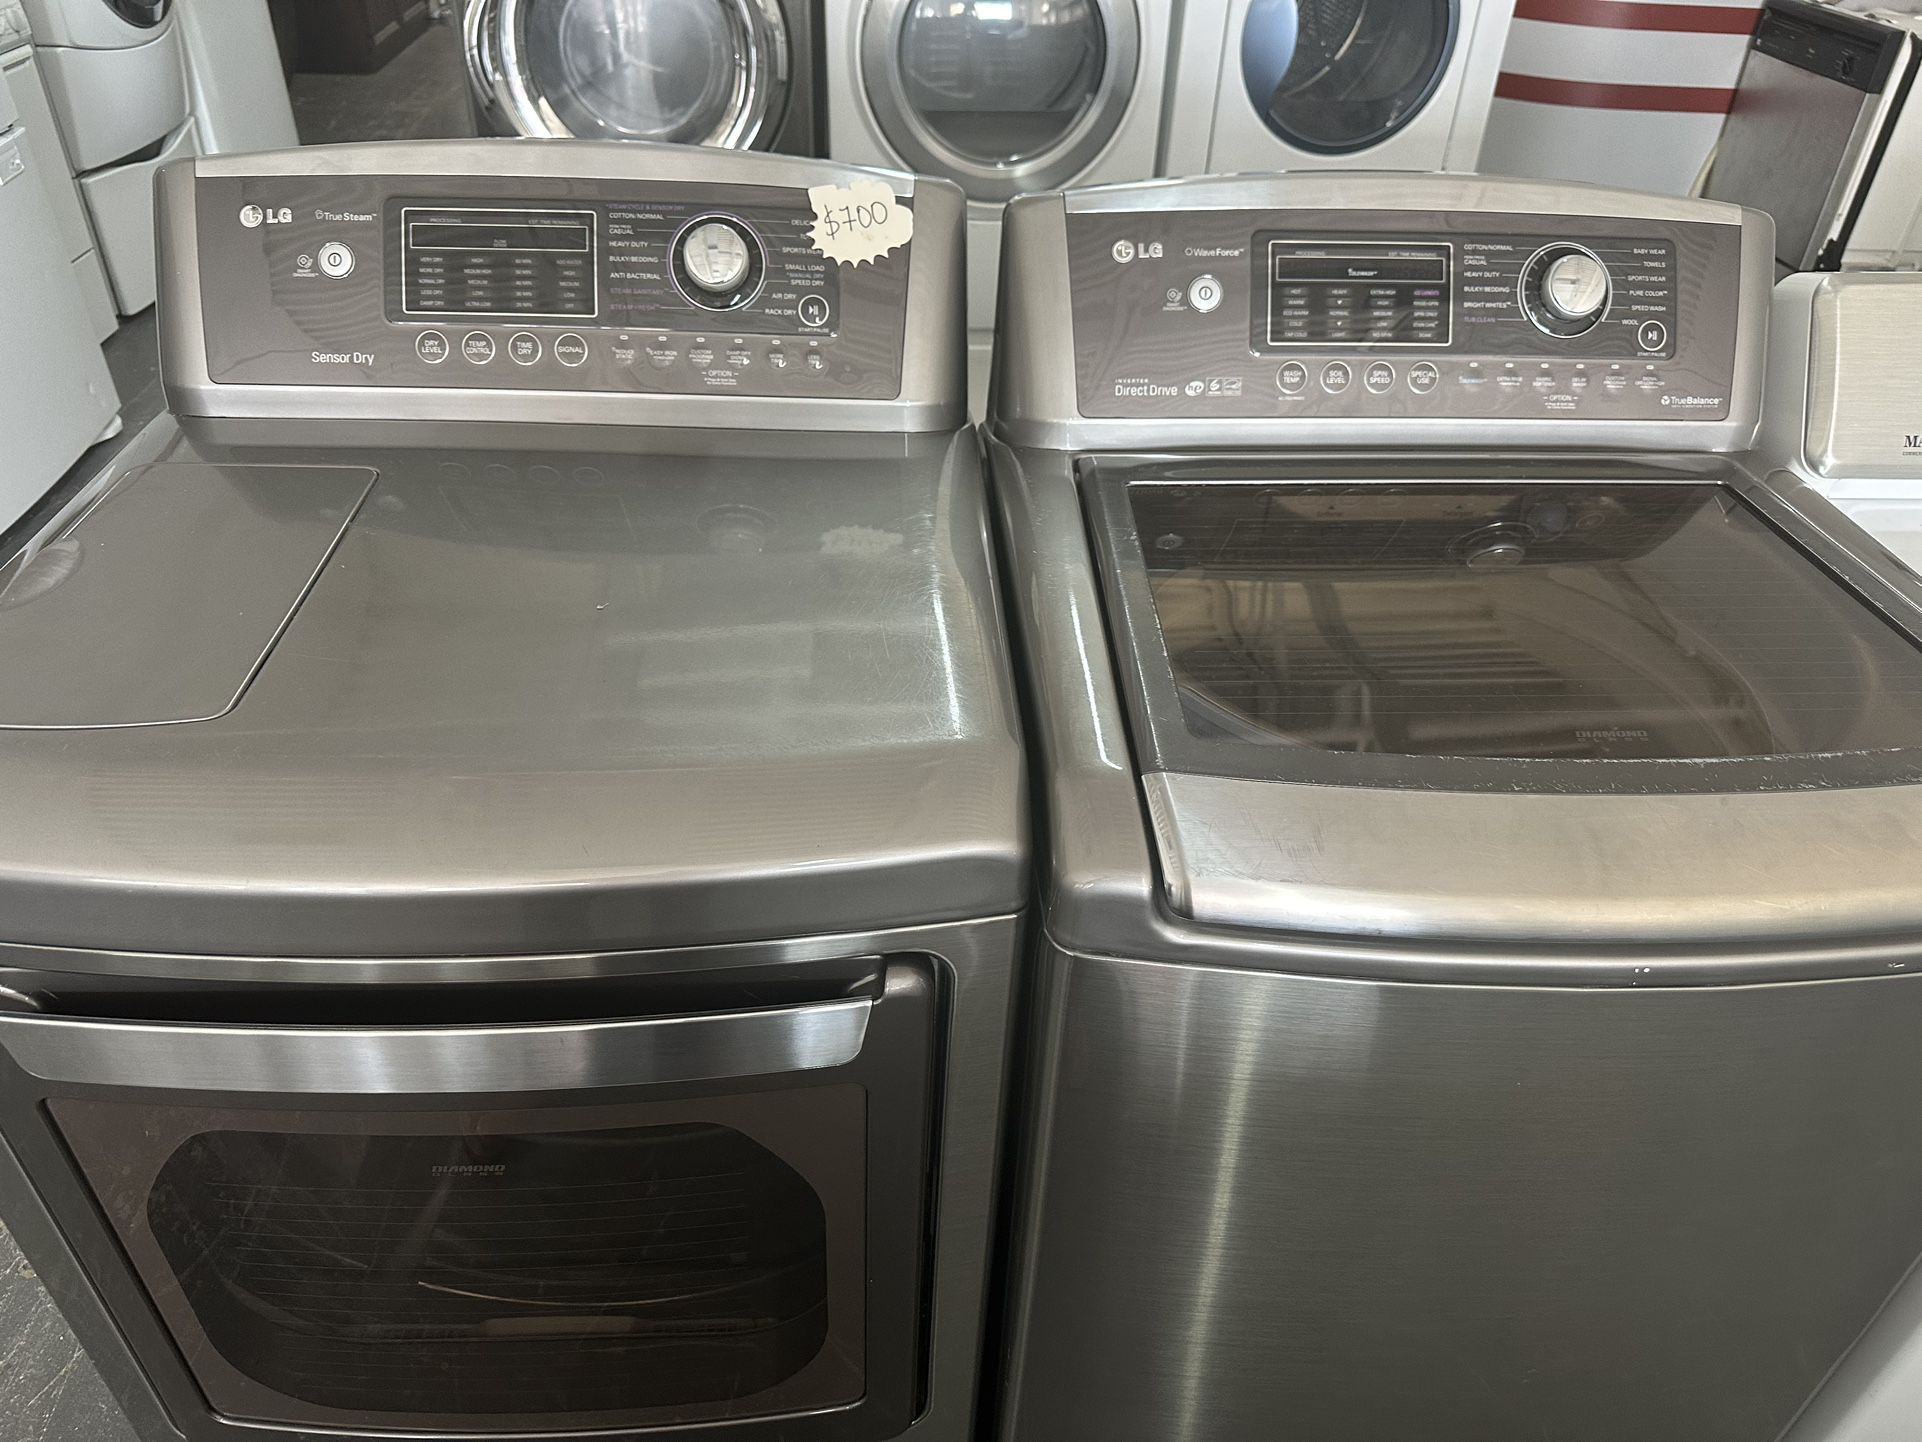 Washer And Dryers Sets Available 